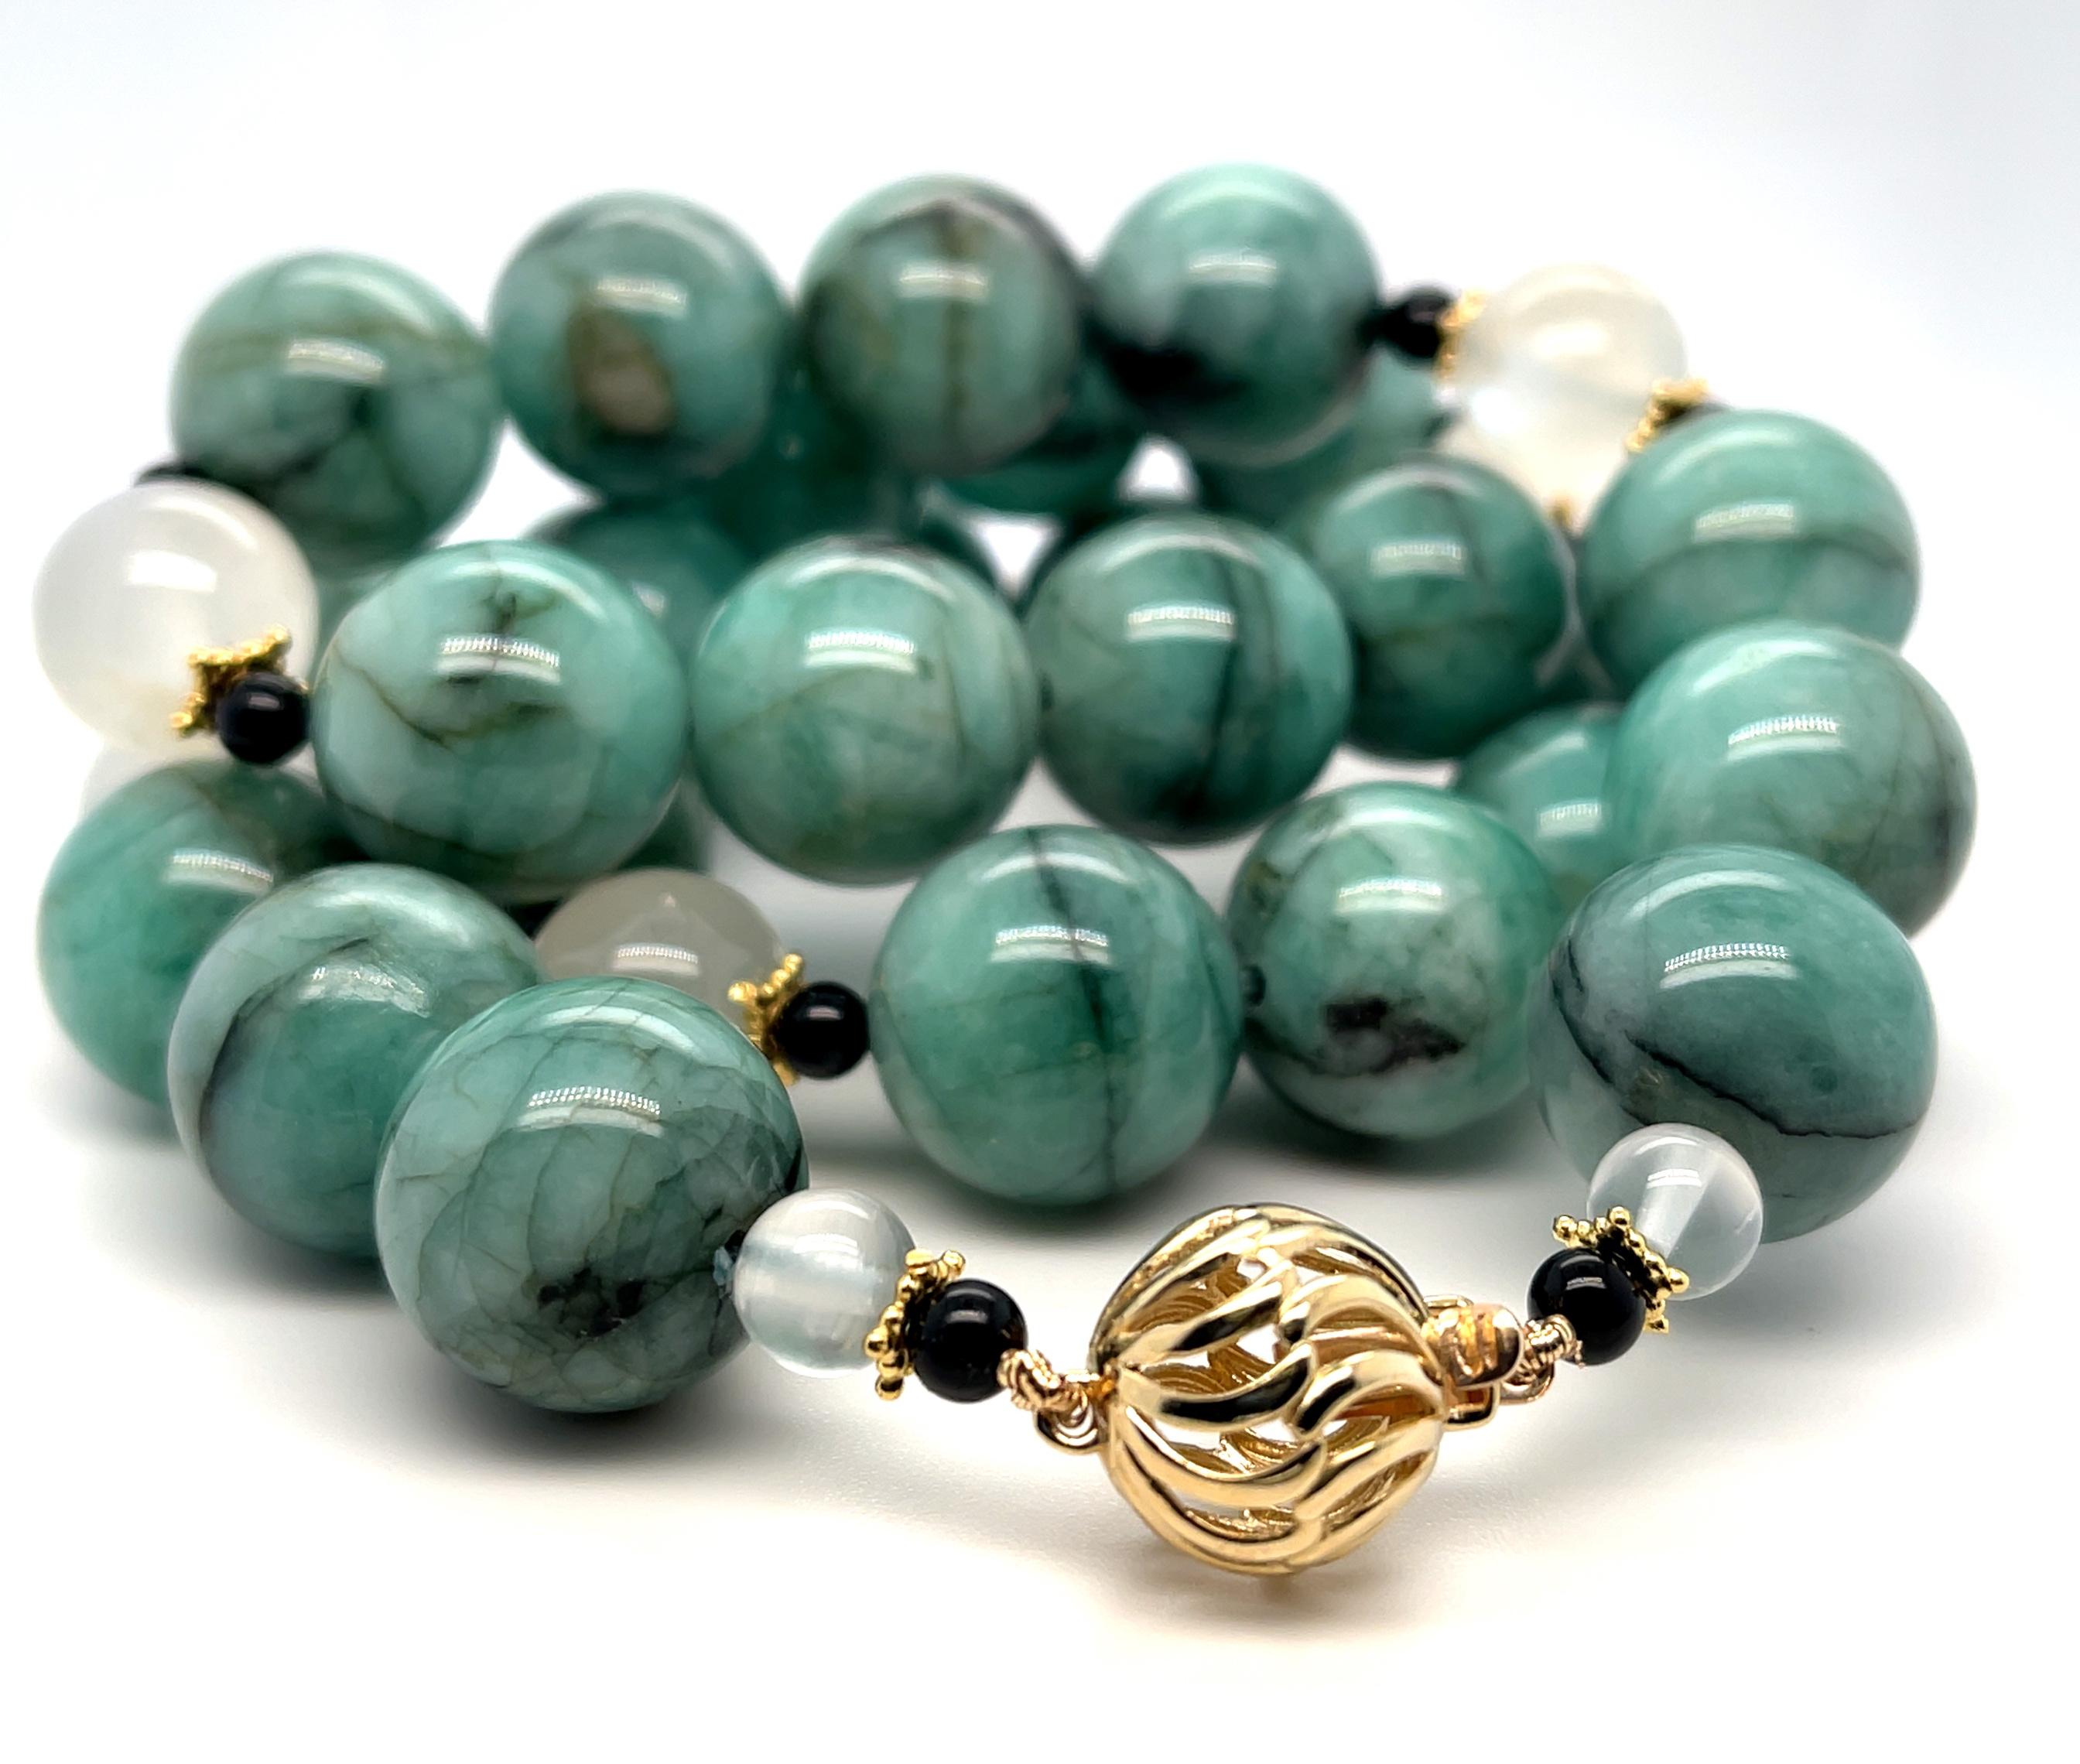 This original strand of natural emerald beads is truly one-of-a-kind! The emeralds in this necklace display lovely shades of soft medium green, variegated with striking black veins that give the beads a luxurious marbled appearance. Arranged with